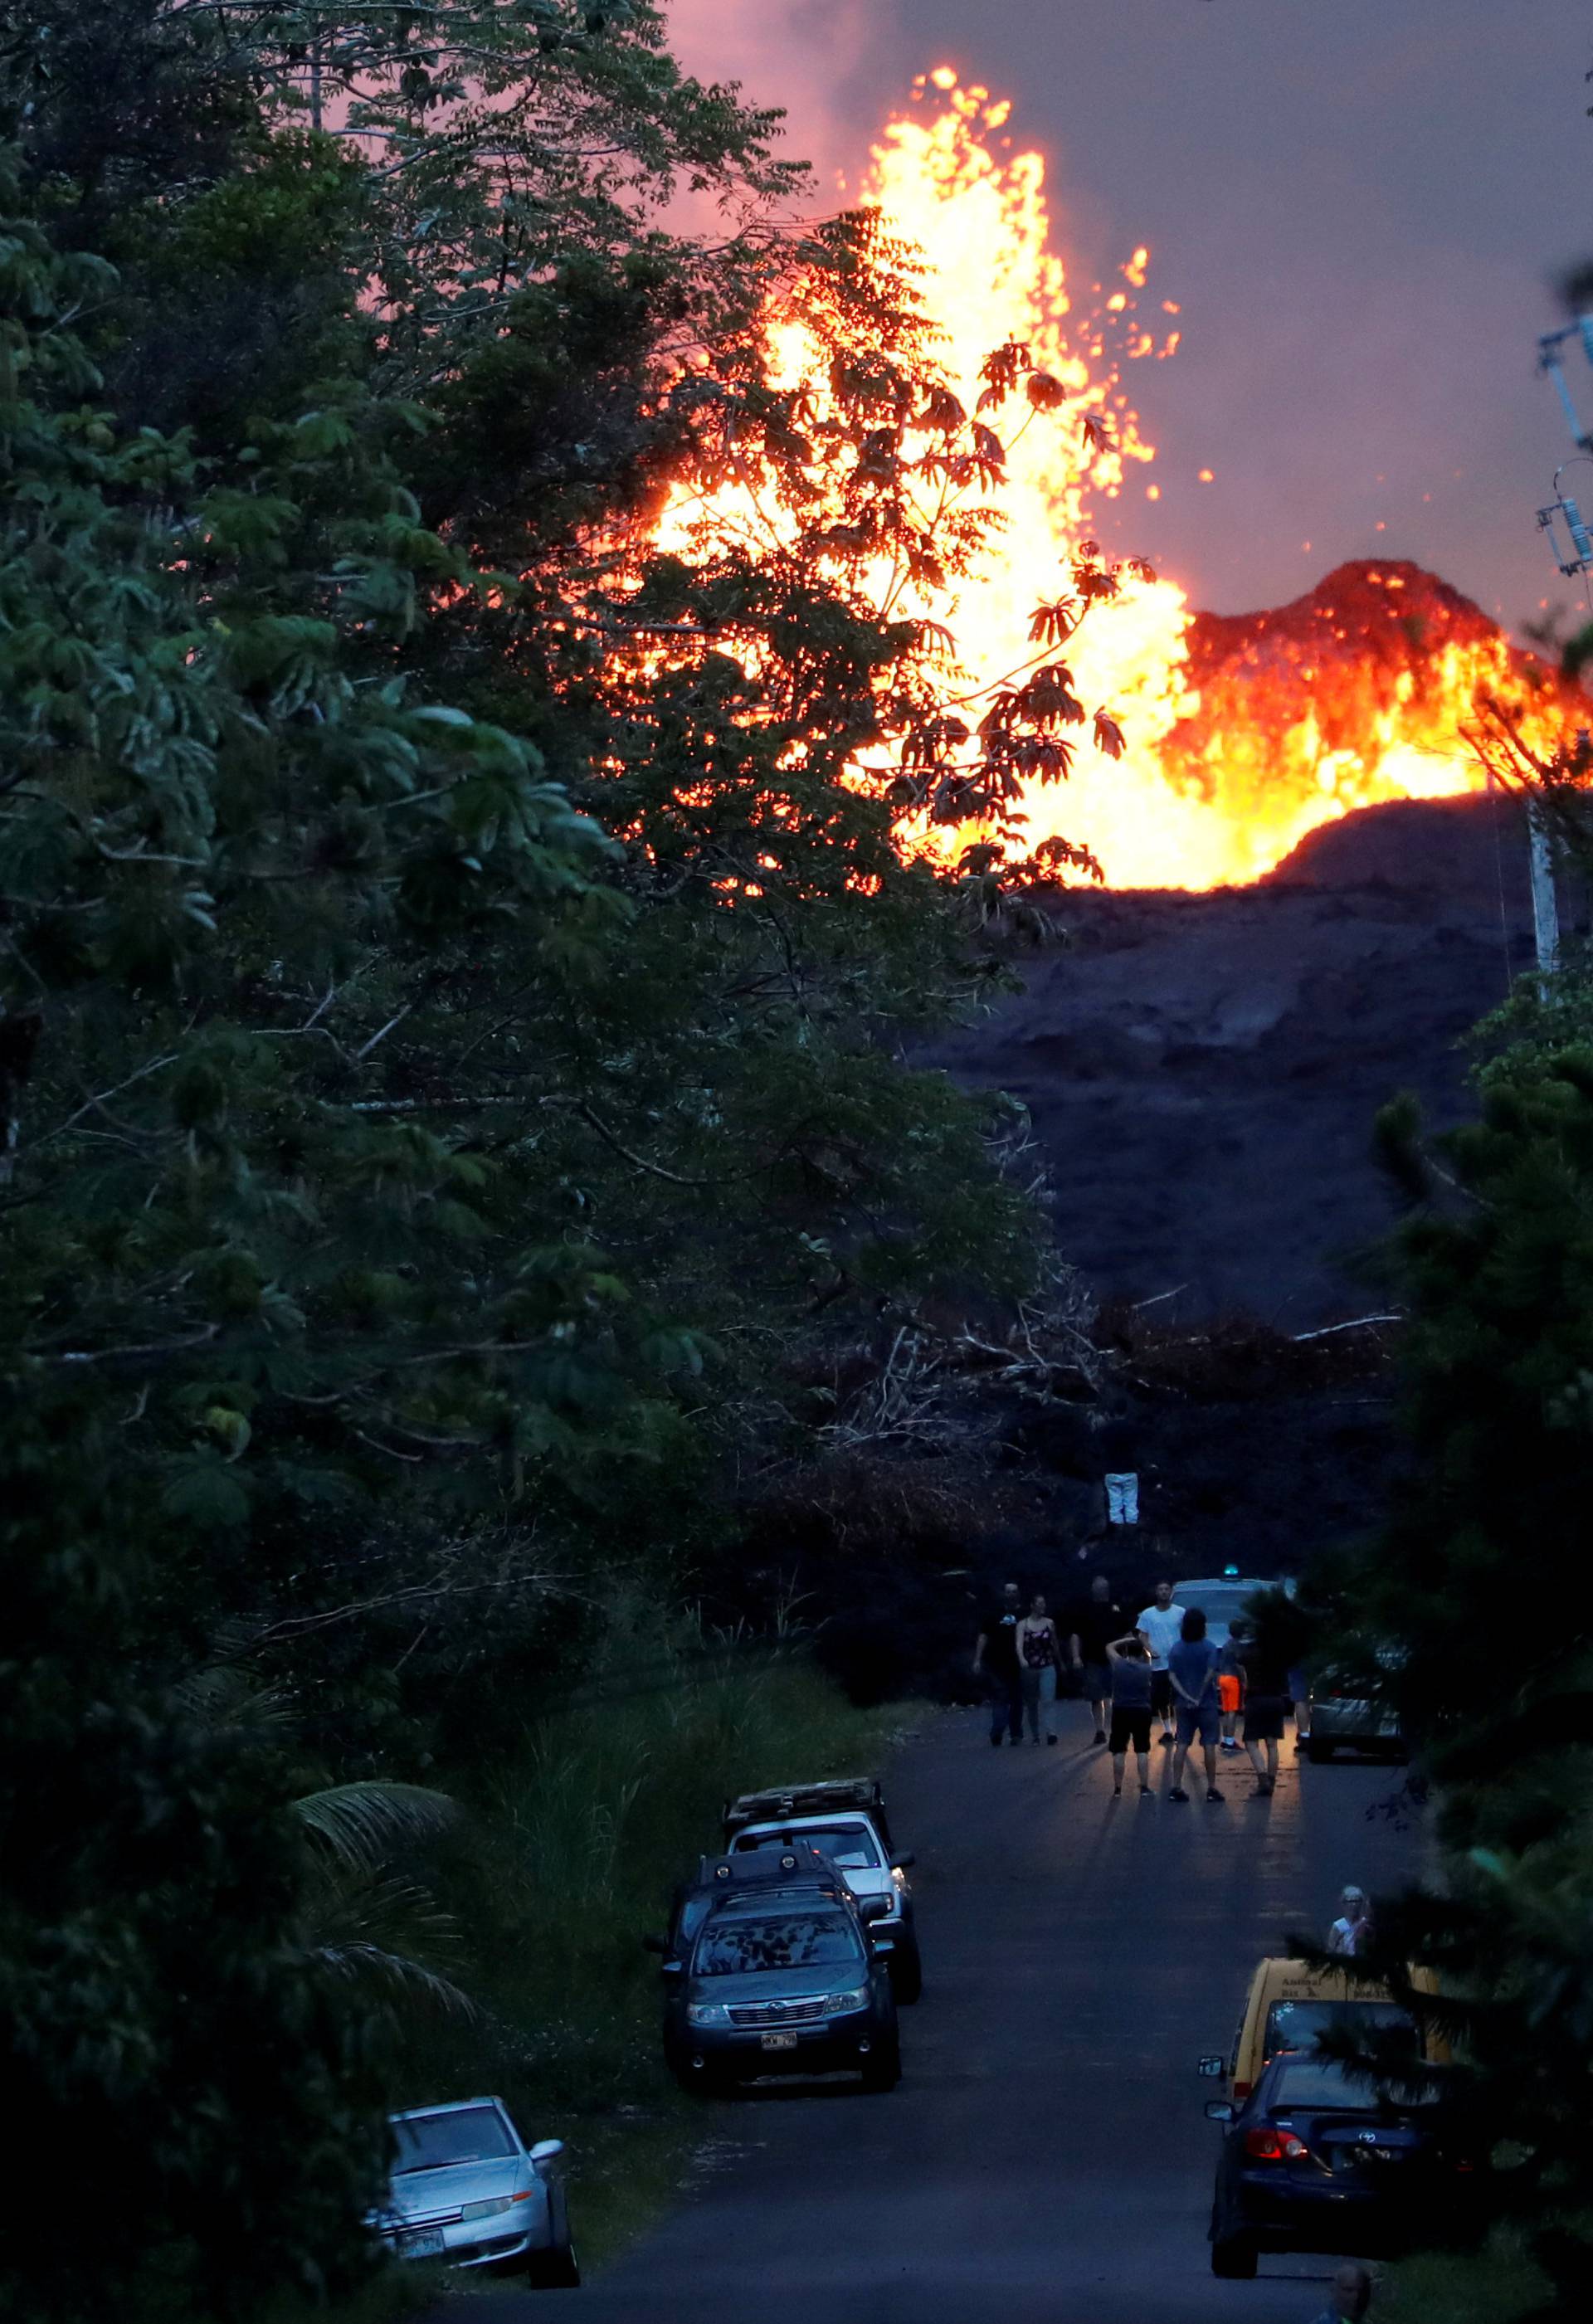 Onlookers gather at the foot of the lava bed, as a lava shoots molten rock into the air, in the Leilani Estates near Pahoa, Hawaii